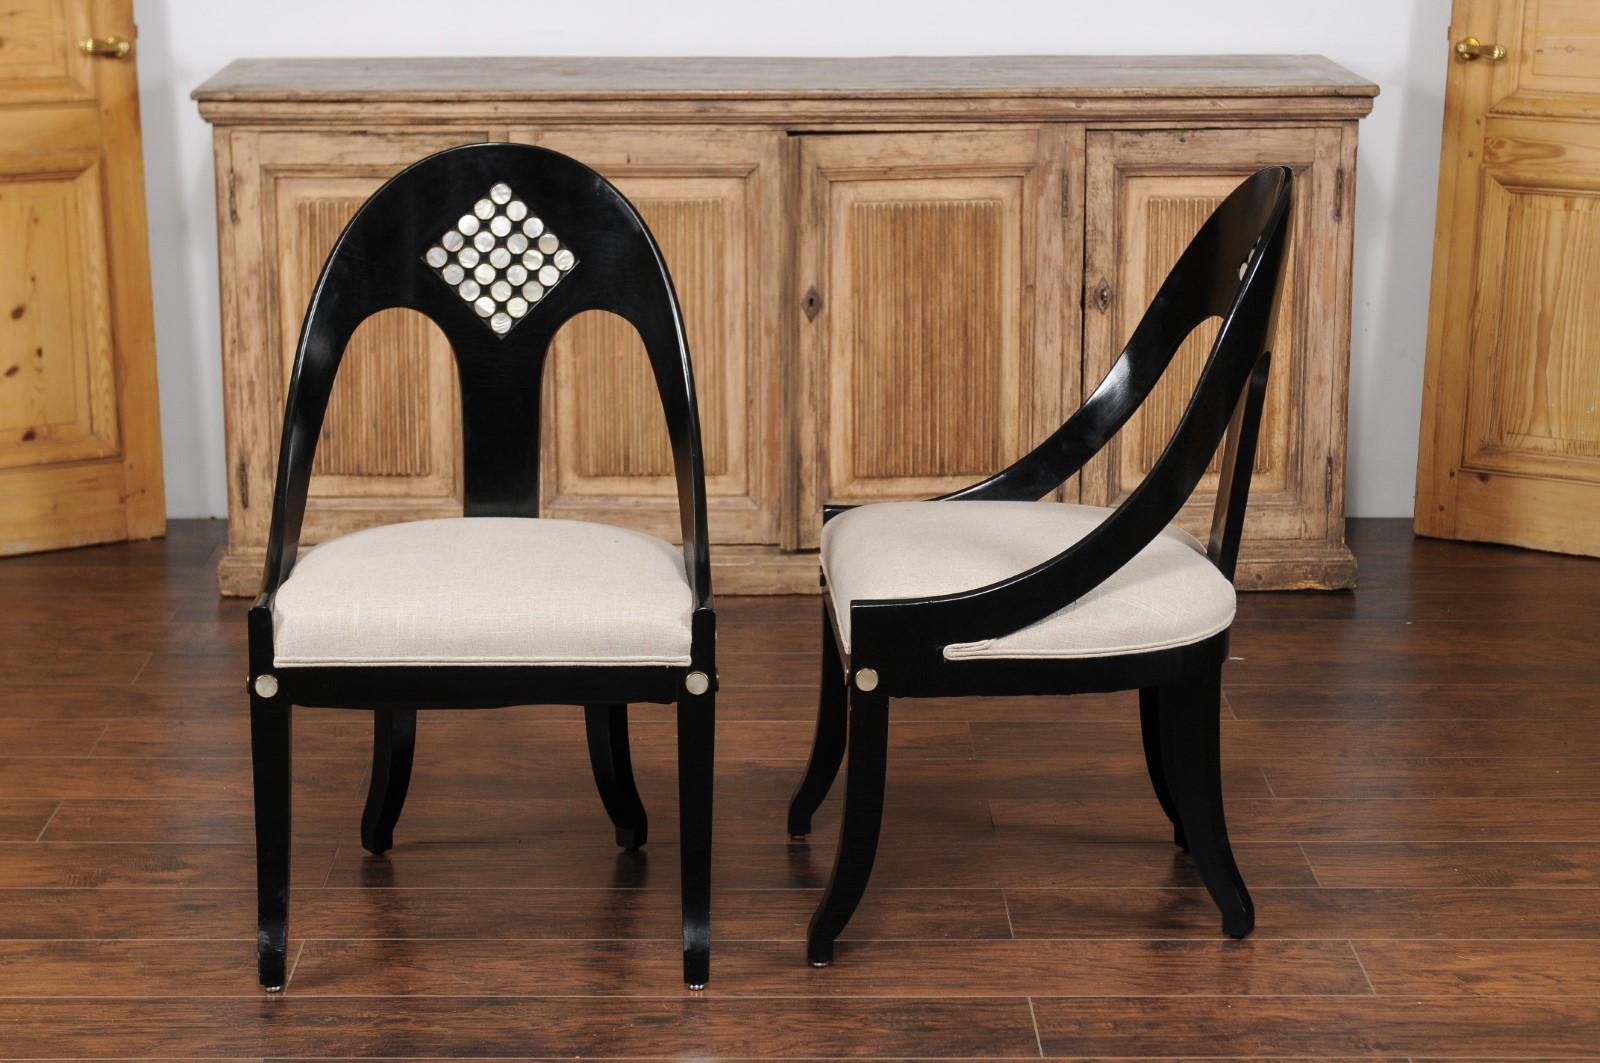 Pair of Vintage 1950s Ebonized Wood Spoon Back Chairs with Mother-of-pearl Inlay 1